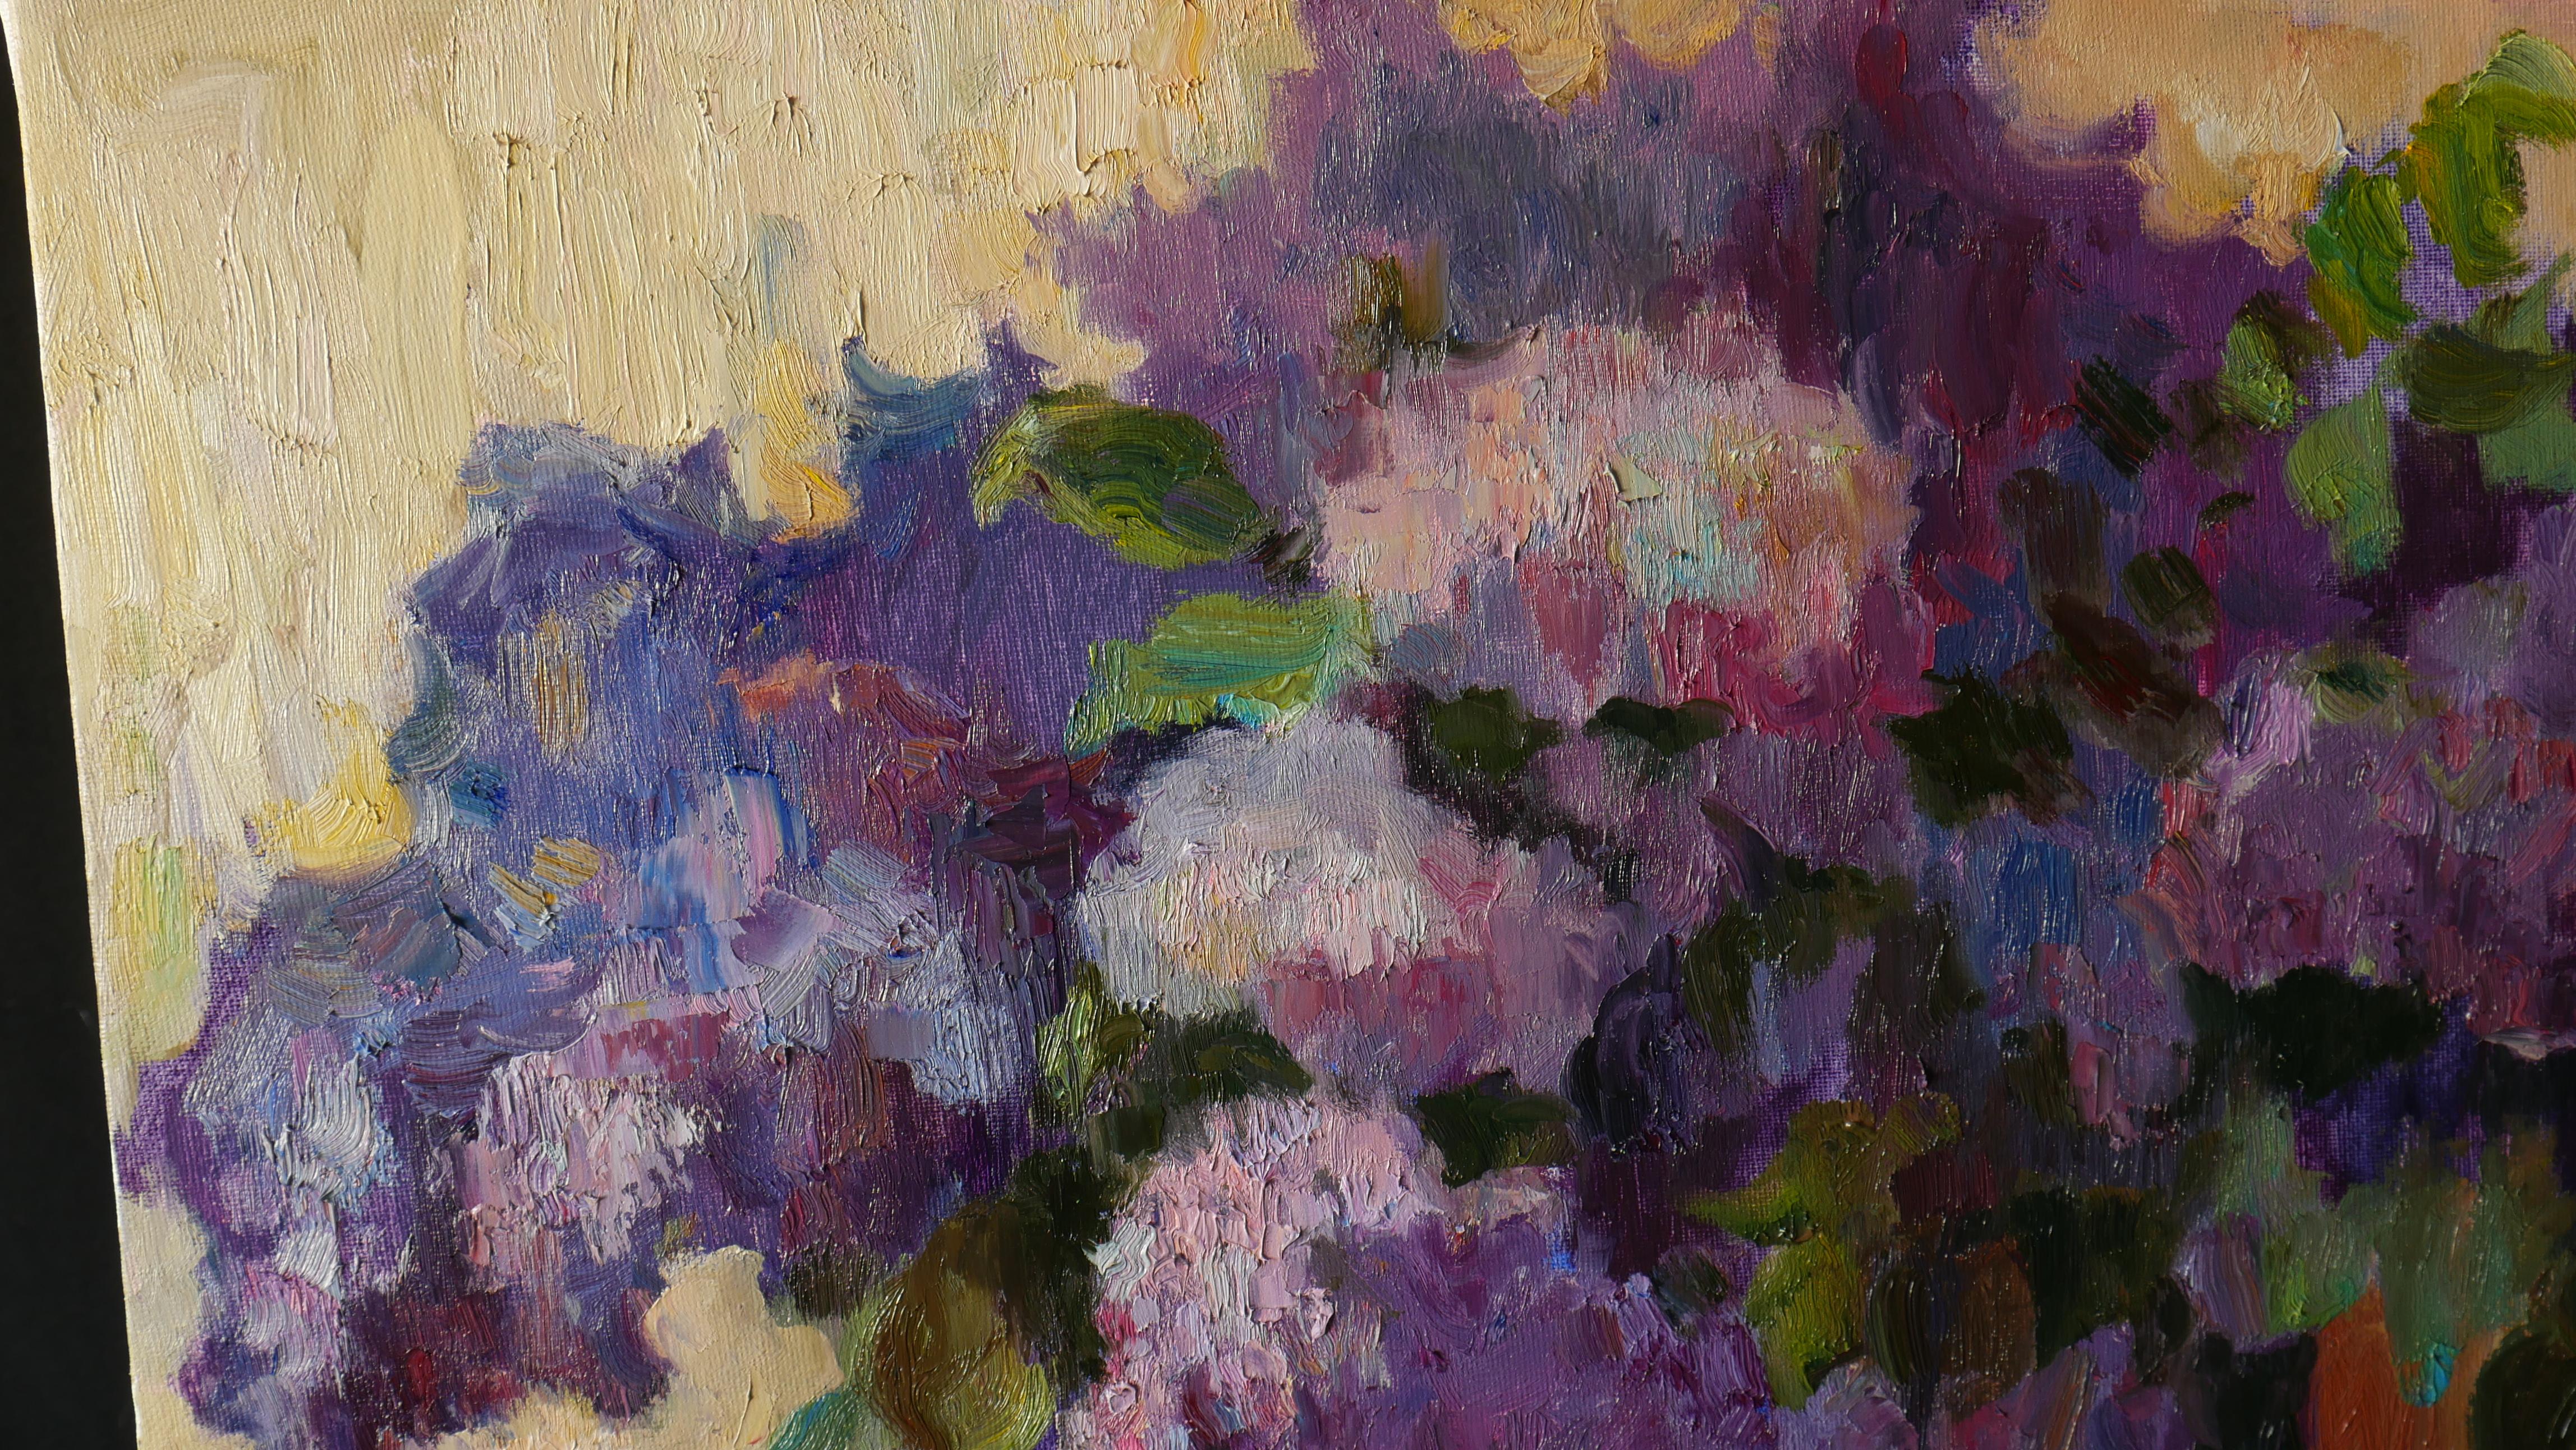 Lilacs In Vase - painting #1 - Abstract Painting by Nikolay Dmitriev